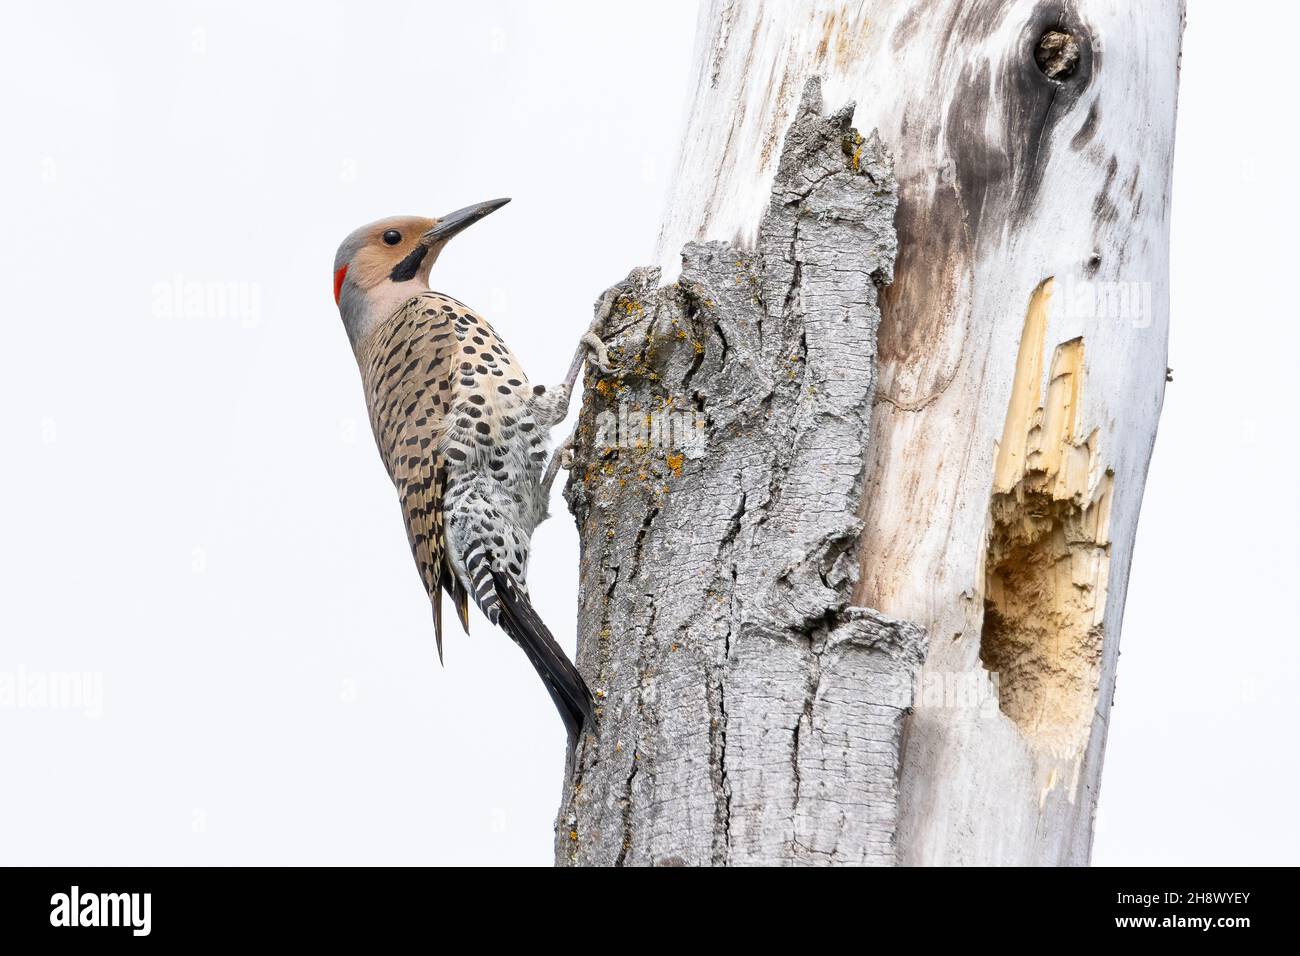 Male Northern Flicker bird hanging on a tree Stock Photo